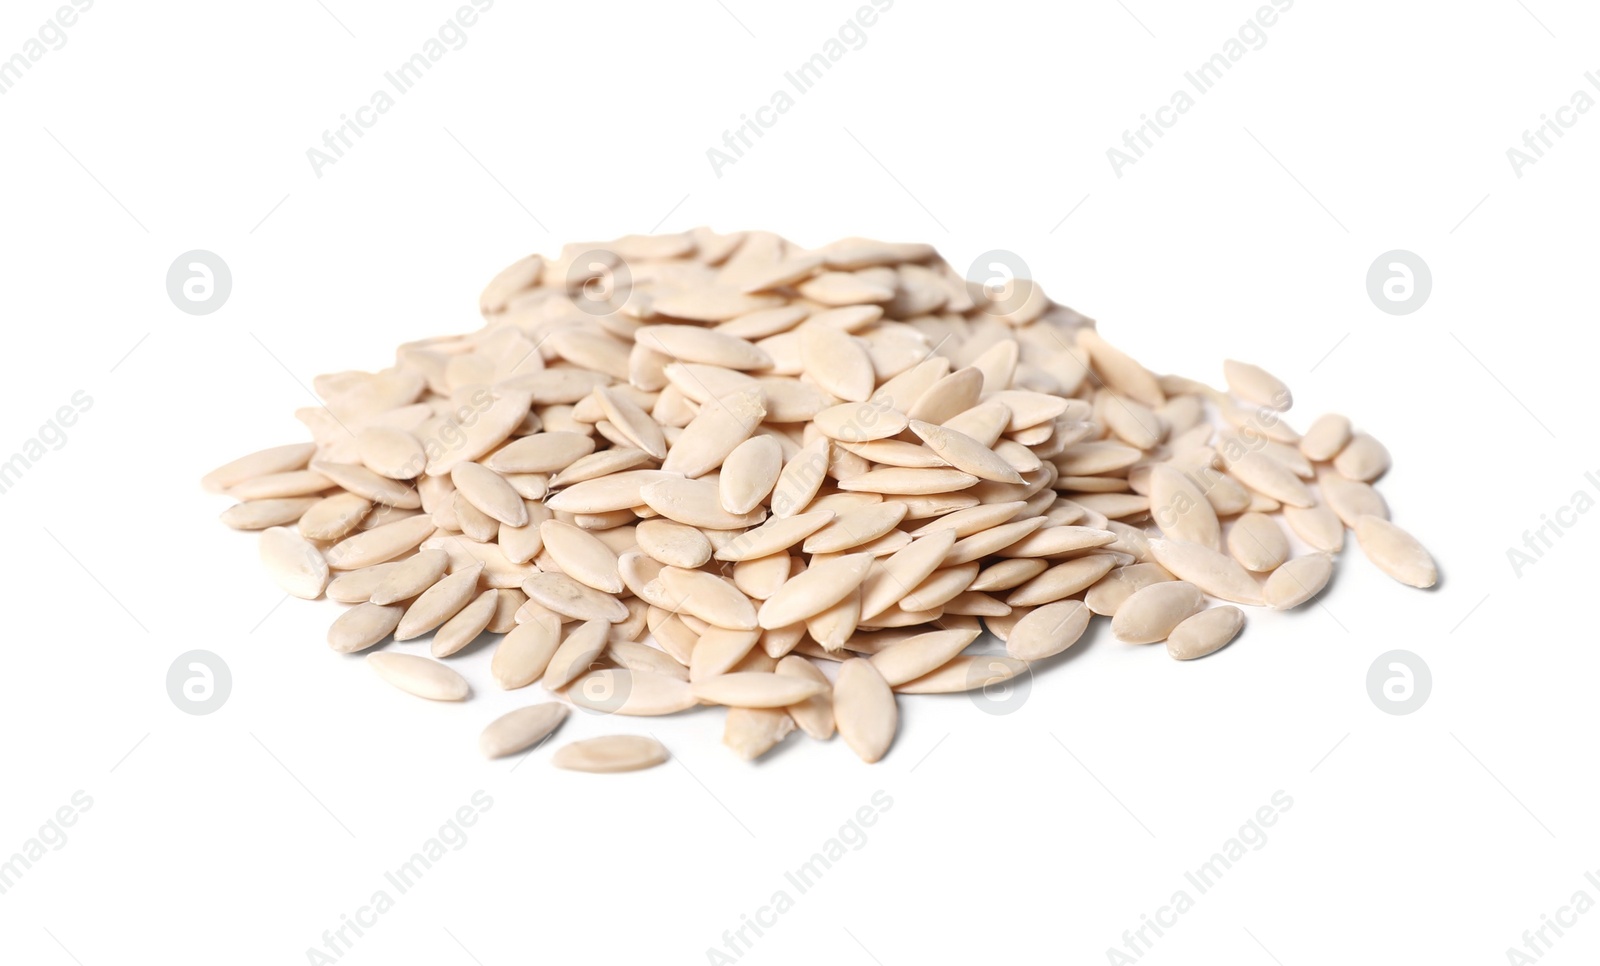 Photo of Pile of cucumber seeds on white background